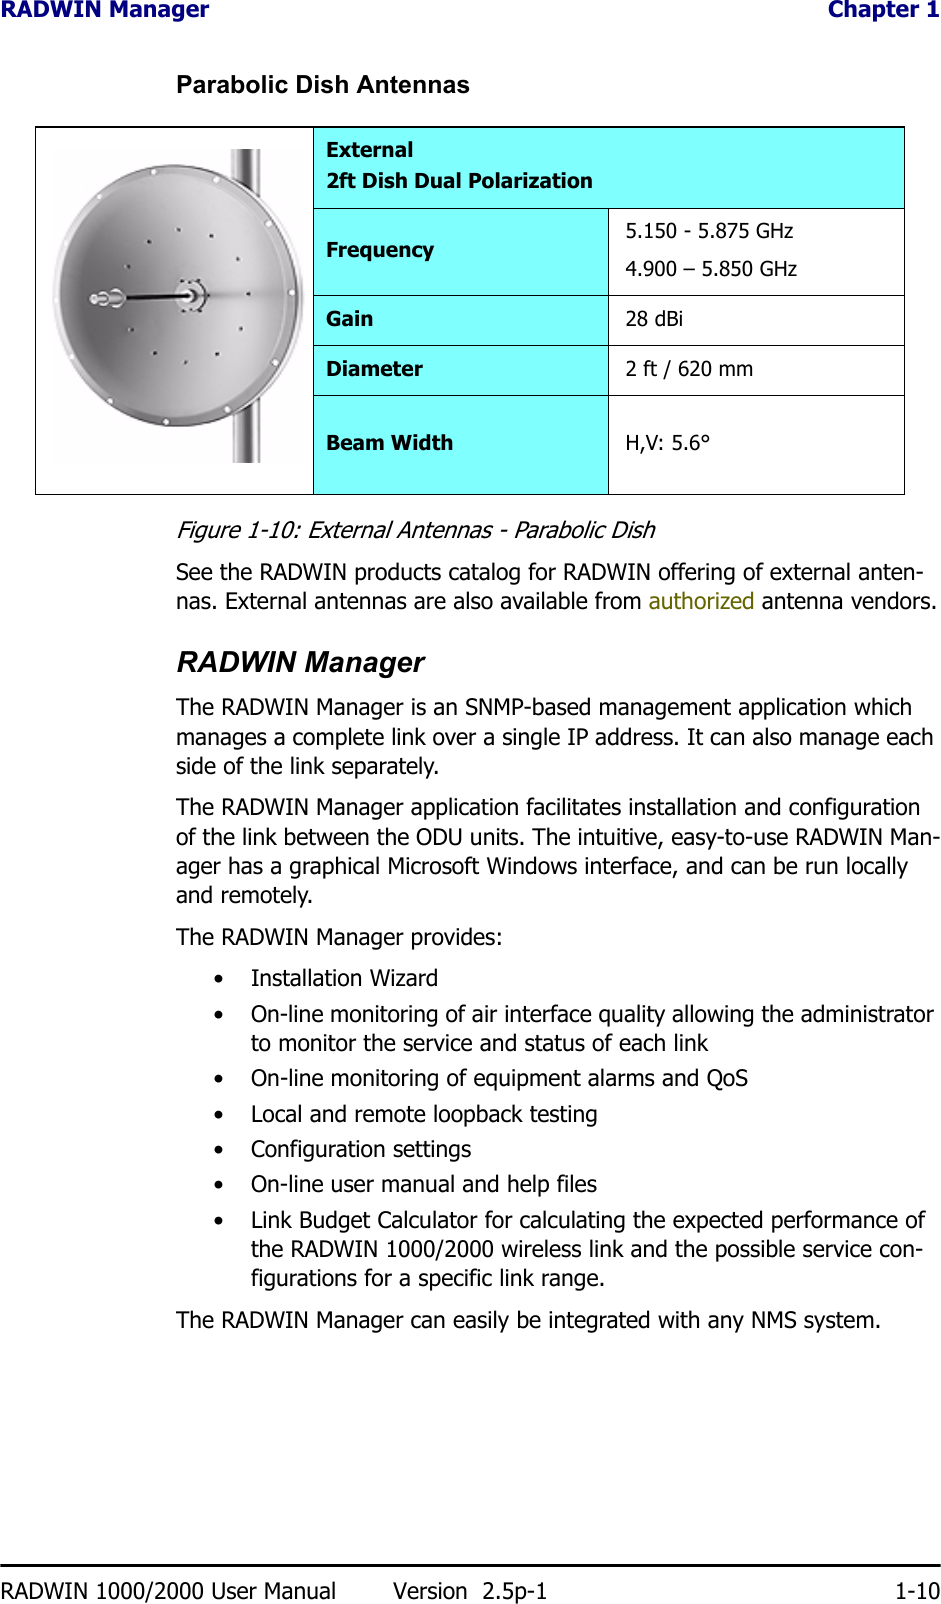 RADWIN Manager  Chapter 1RADWIN 1000/2000 User Manual Version  2.5p-1 1-10Parabolic Dish AntennasFigure 1-10: External Antennas - Parabolic DishSee the RADWIN products catalog for RADWIN offering of external anten-nas. External antennas are also available from authorized antenna vendors.RADWIN ManagerThe RADWIN Manager is an SNMP-based management application which manages a complete link over a single IP address. It can also manage each side of the link separately.The RADWIN Manager application facilitates installation and configuration of the link between the ODU units. The intuitive, easy-to-use RADWIN Man-ager has a graphical Microsoft Windows interface, and can be run locally and remotely. The RADWIN Manager provides:• Installation Wizard• On-line monitoring of air interface quality allowing the administrator to monitor the service and status of each link• On-line monitoring of equipment alarms and QoS• Local and remote loopback testing• Configuration settings• On-line user manual and help files• Link Budget Calculator for calculating the expected performance of the RADWIN 1000/2000 wireless link and the possible service con-figurations for a specific link range.The RADWIN Manager can easily be integrated with any NMS system.External2ft Dish Dual PolarizationFrequency 5.150 - 5.875 GHz4.900 – 5.850 GHzGain 28 dBiDiameter 2 ft / 620 mmBeam Width H,V: 5.6°